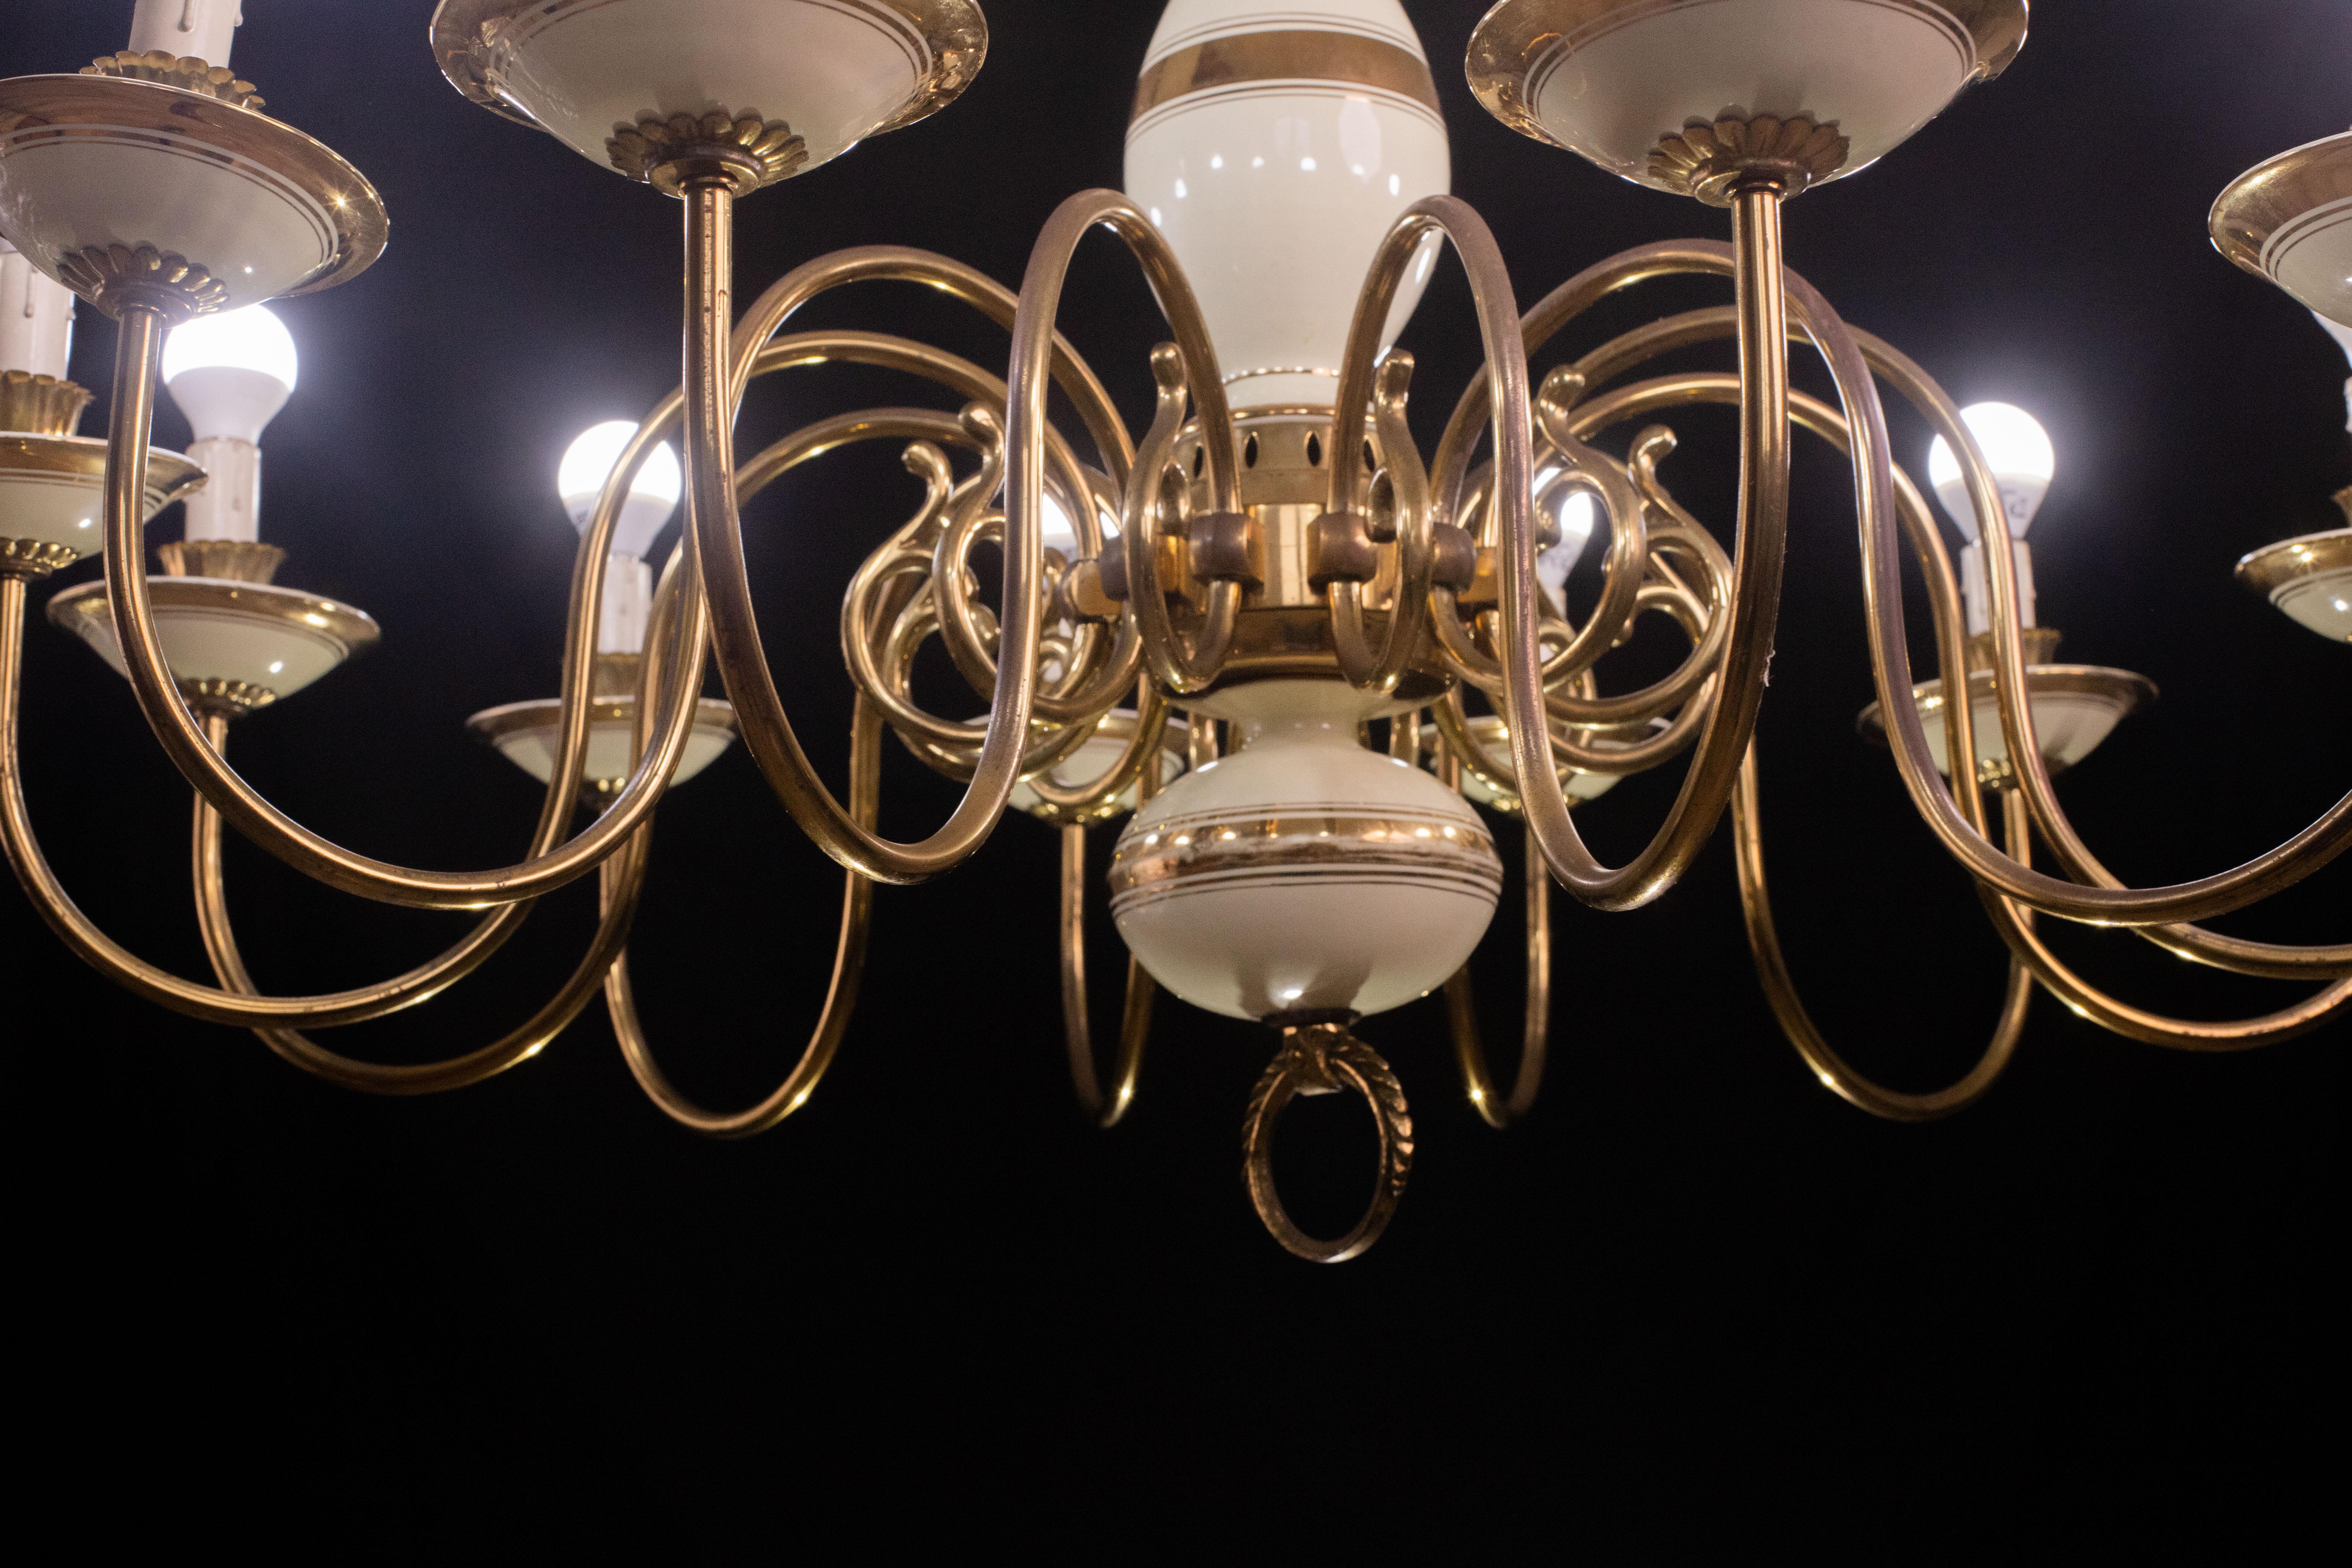 Monumental 12 Lights Art Deco Brass and Ceramic Chandelier, 1950s For Sale 3